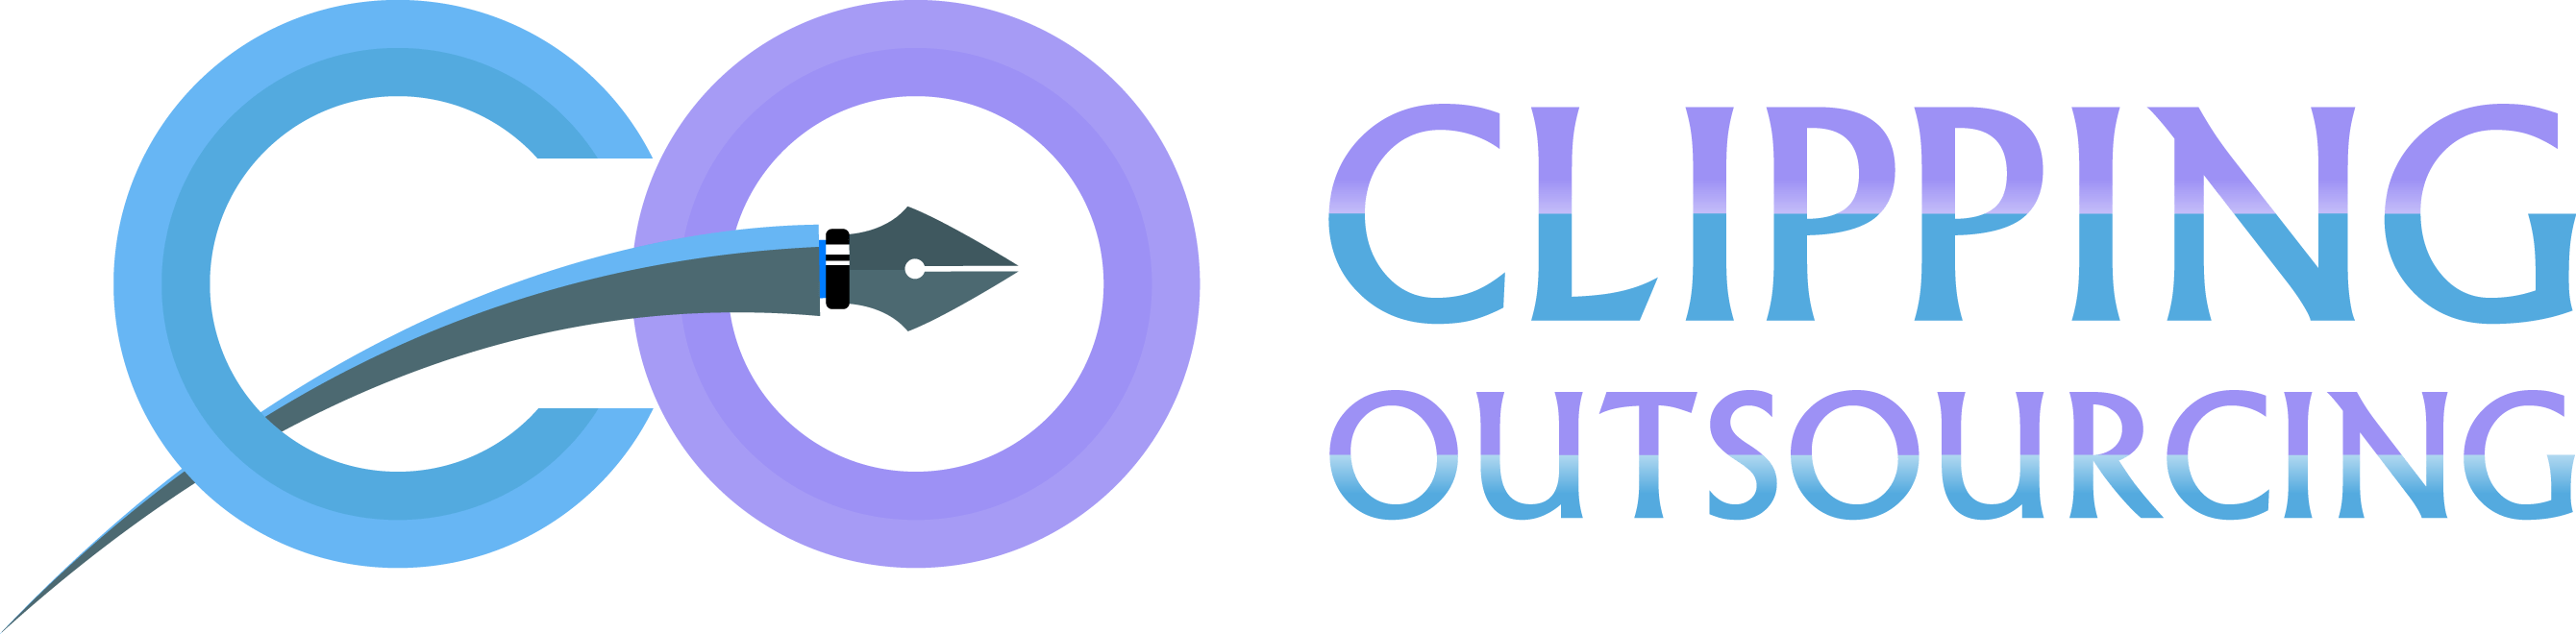 Clipping Outsourcing